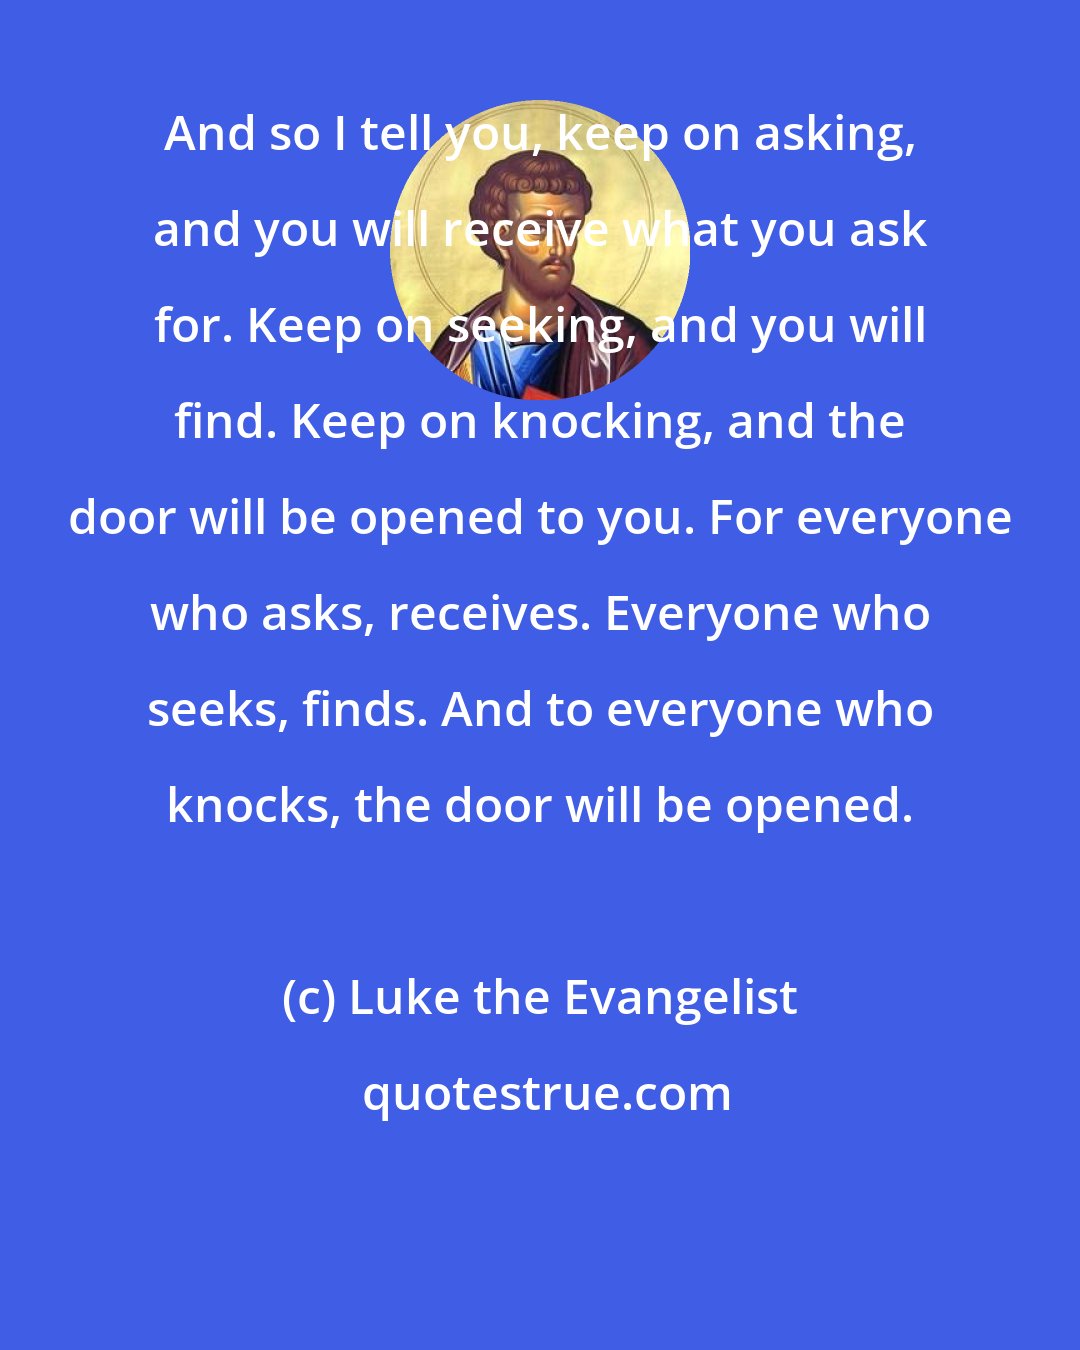 Luke the Evangelist: And so I tell you, keep on asking, and you will receive what you ask for. Keep on seeking, and you will find. Keep on knocking, and the door will be opened to you. For everyone who asks, receives. Everyone who seeks, finds. And to everyone who knocks, the door will be opened.